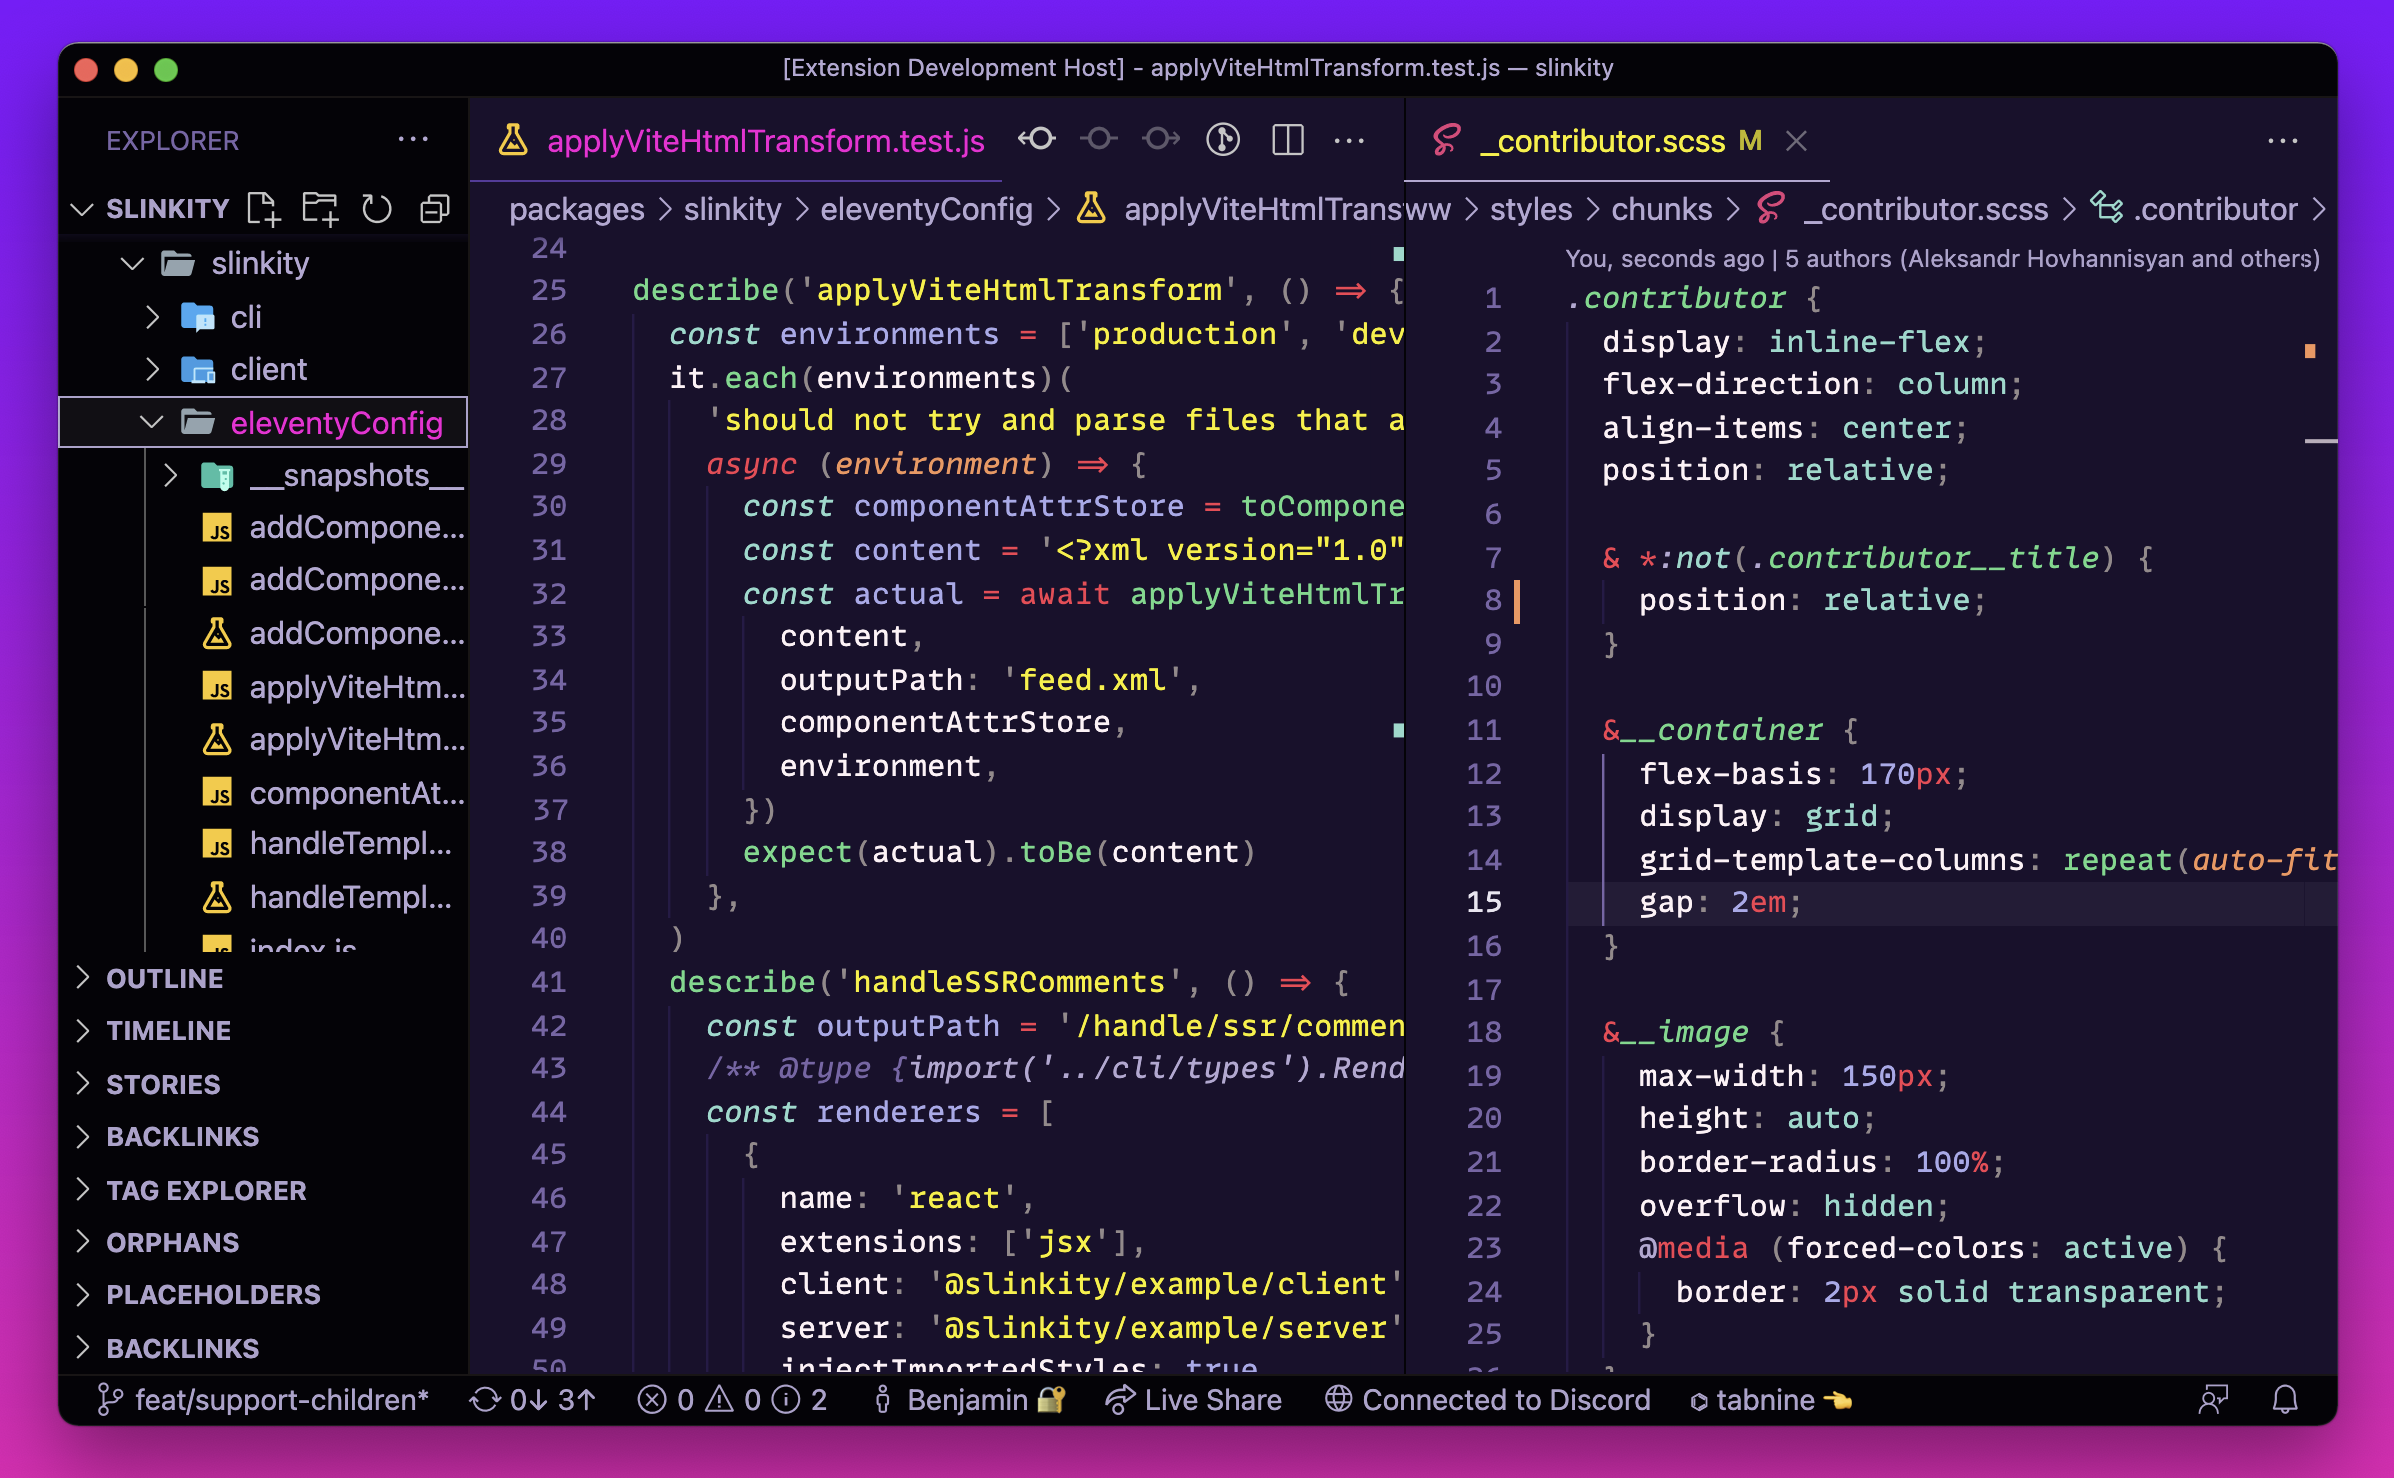 Split-pane editor using the "slinkwave" theme. Previews syntax for scss and JS